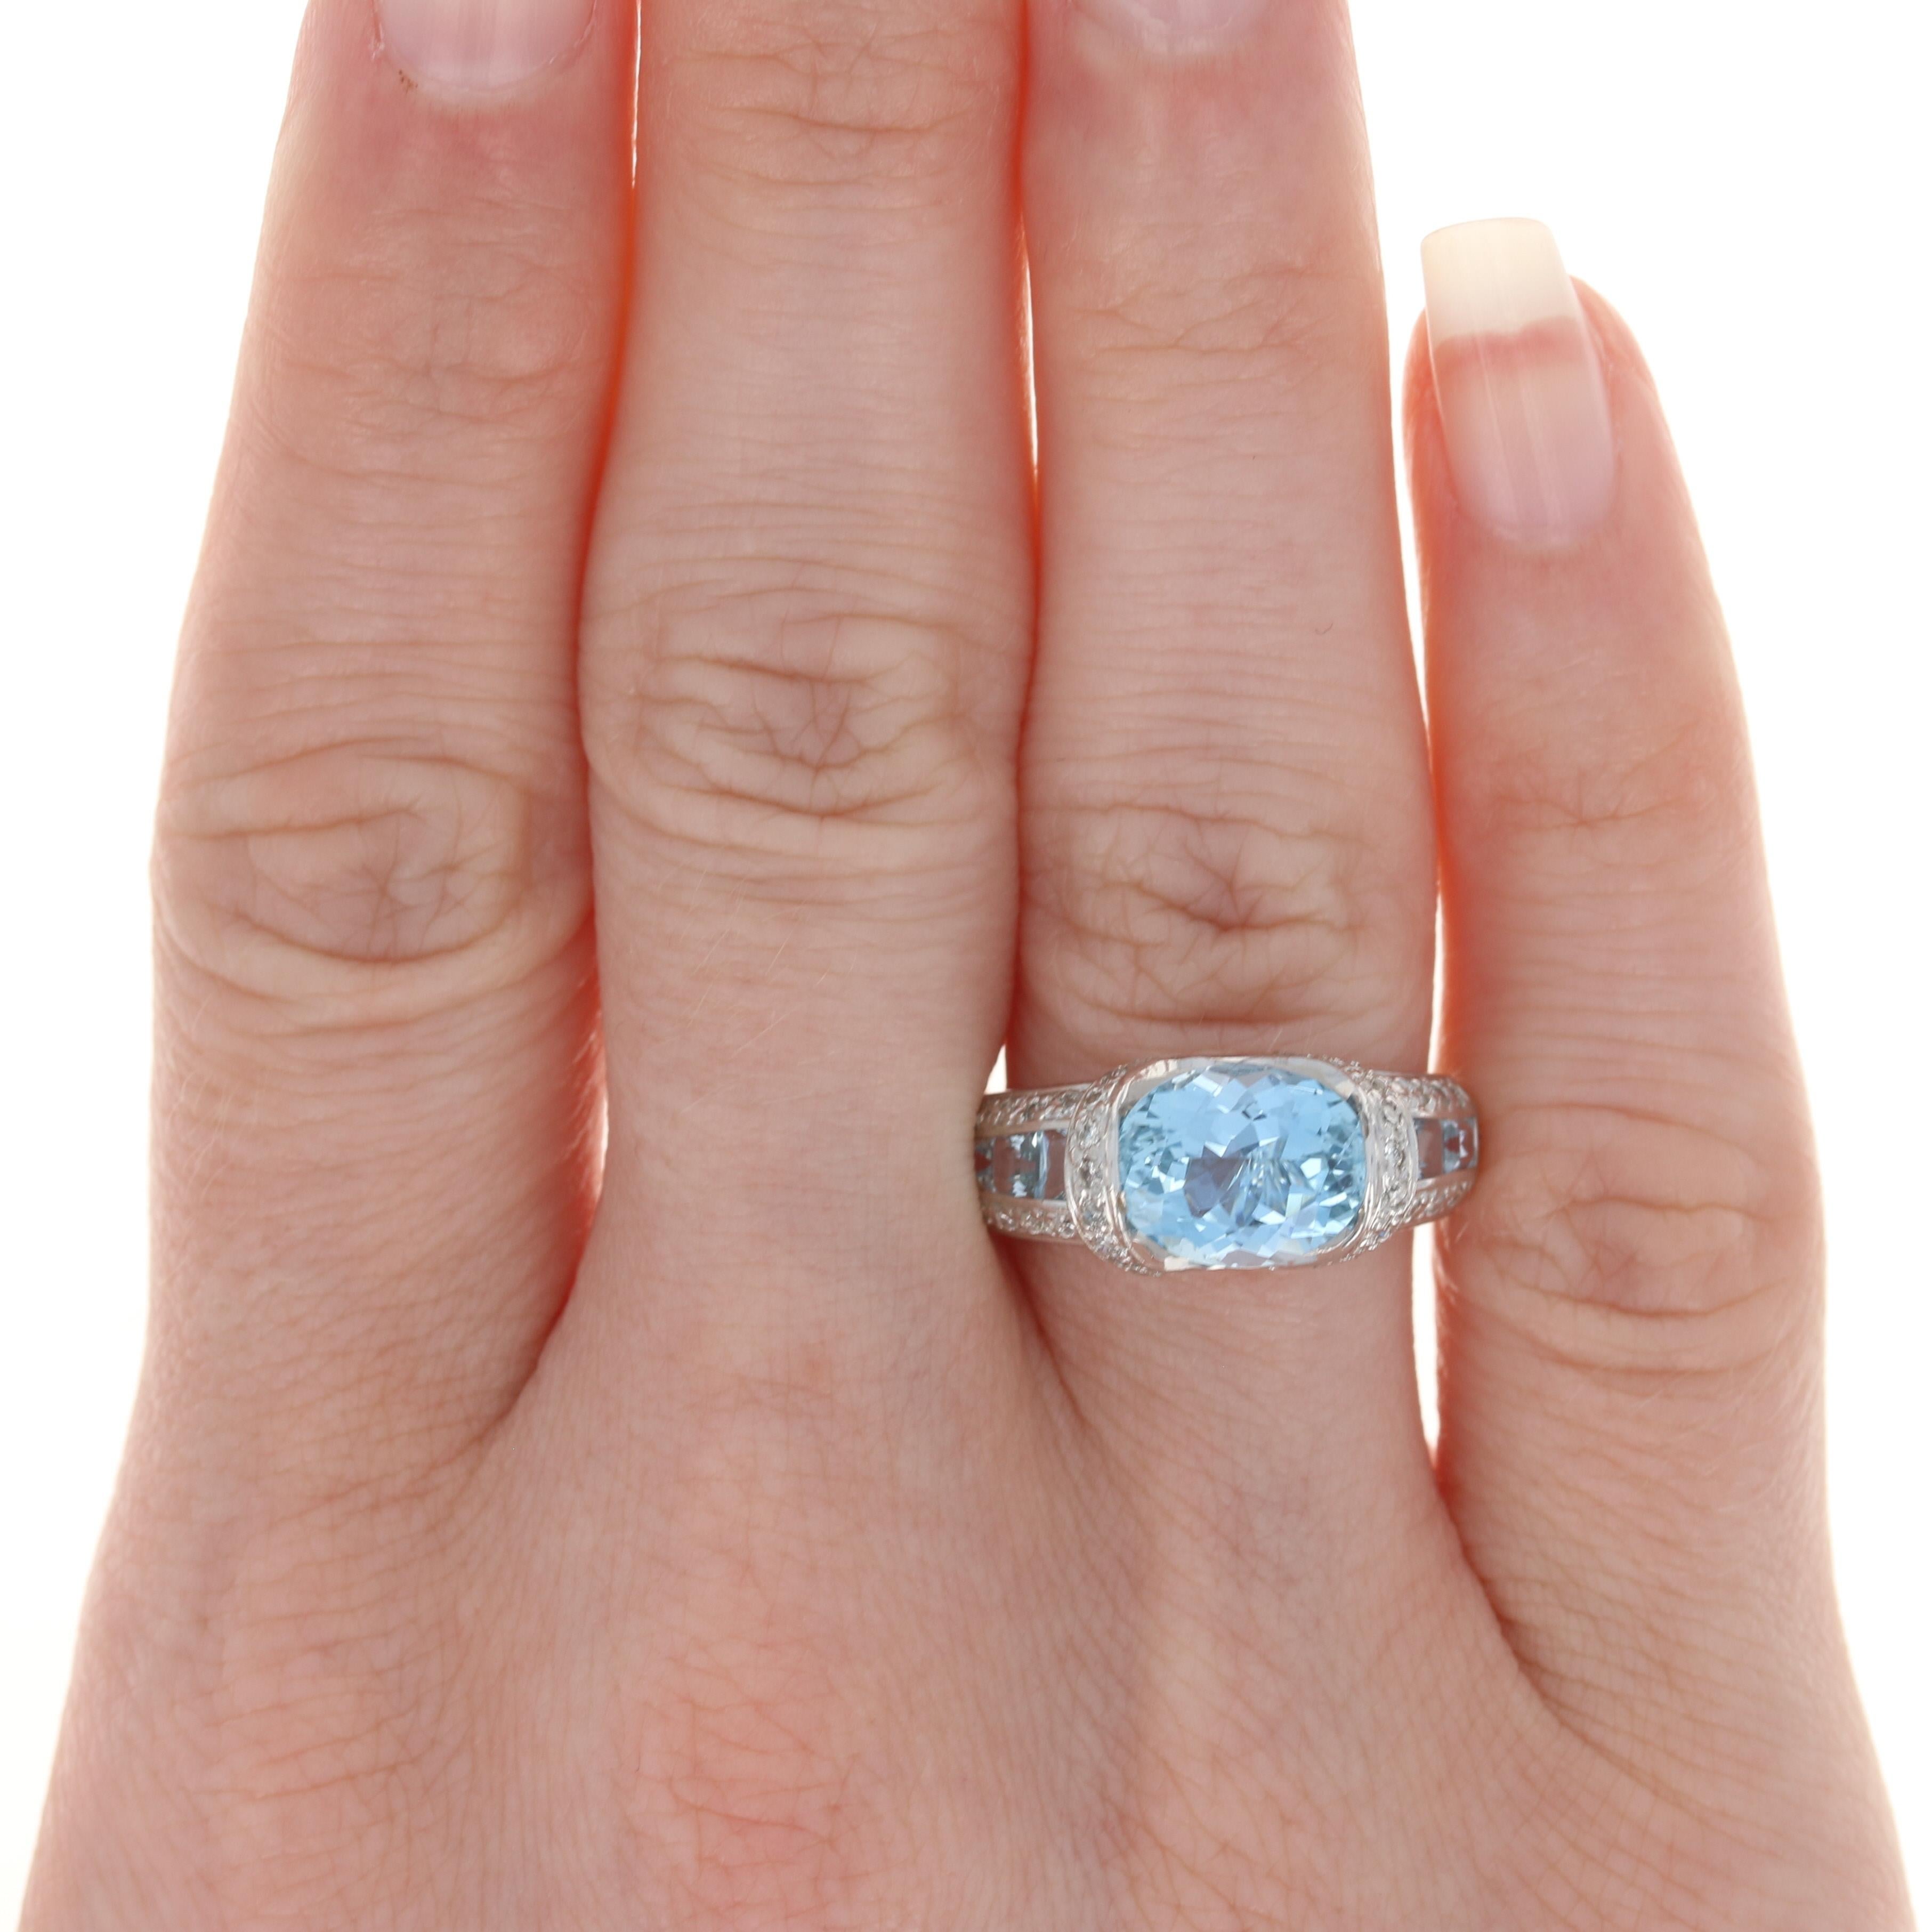 Size: 7

Metal Content: 14k White Gold

Stone Information: 
Genuine Aquamarine Solitaire
Treatment: Heating
Carat: 2.25ct 
Cut: Oval
Color: Blue

Genuine Aquamarine Accents
Treatment: Heating
Carats: 1.20ctw 
Cut: Square 
Color: Blue

Natural